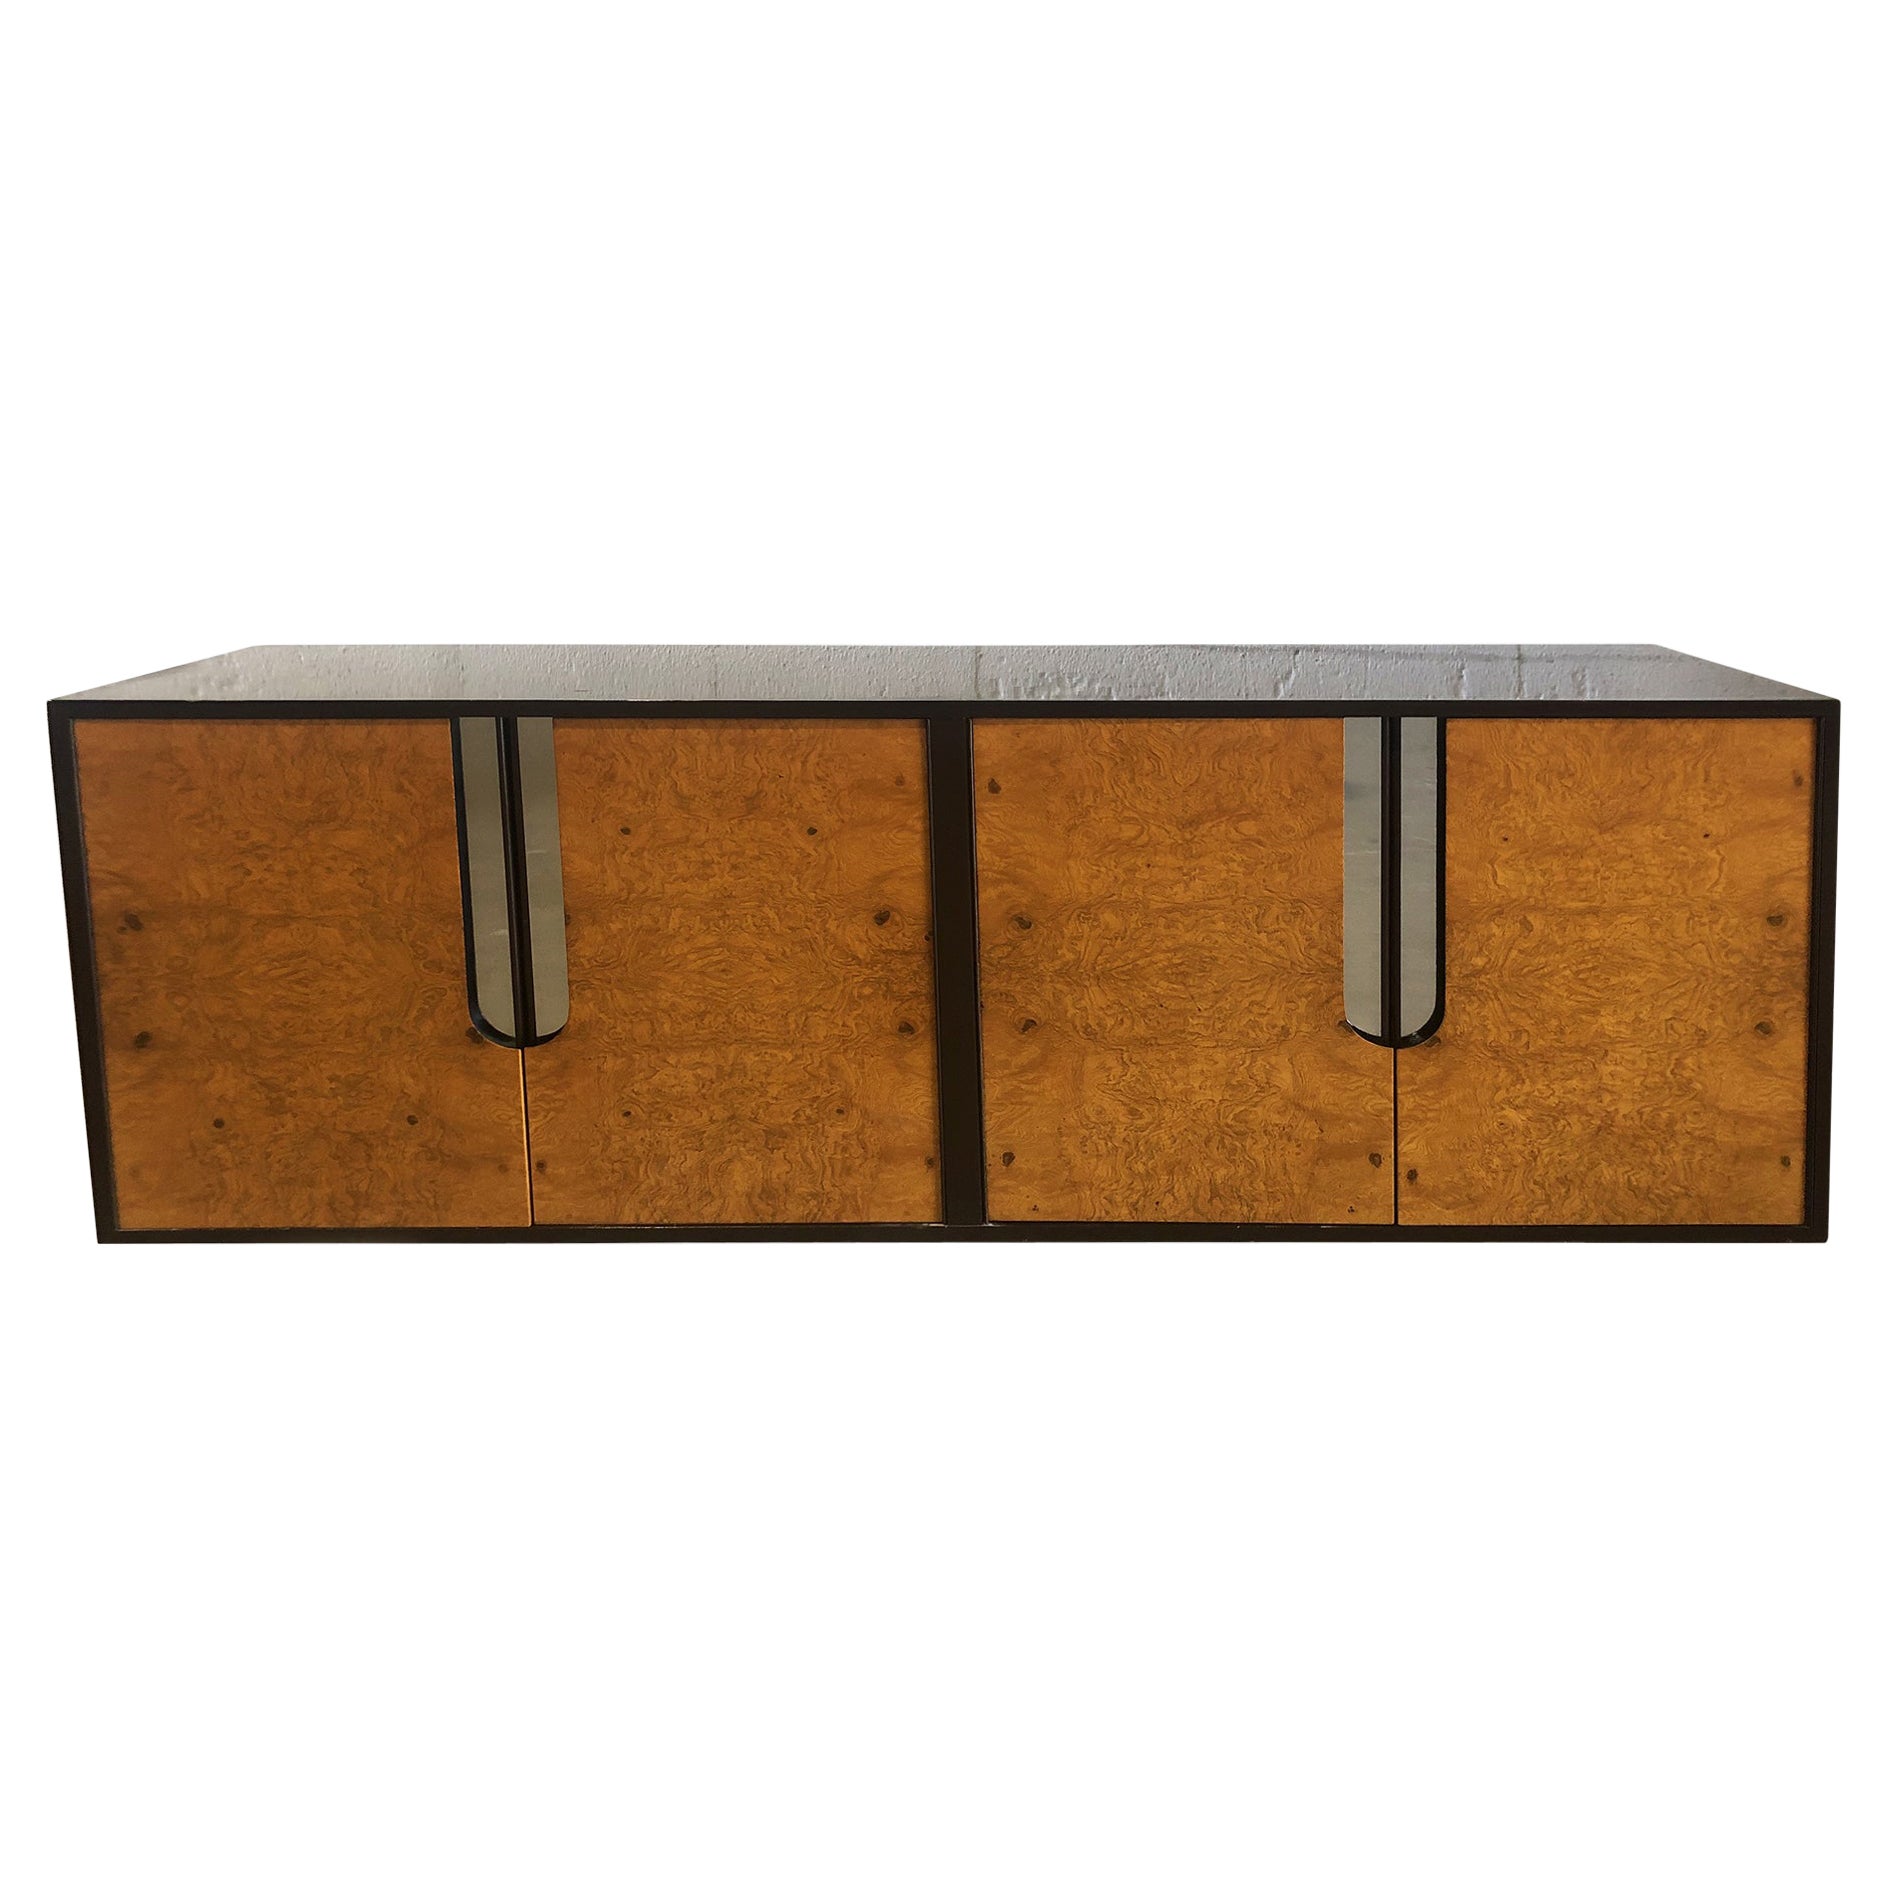 American Modern Burlwood, Black Lacquer and Chrome Credenza, Pace Collection